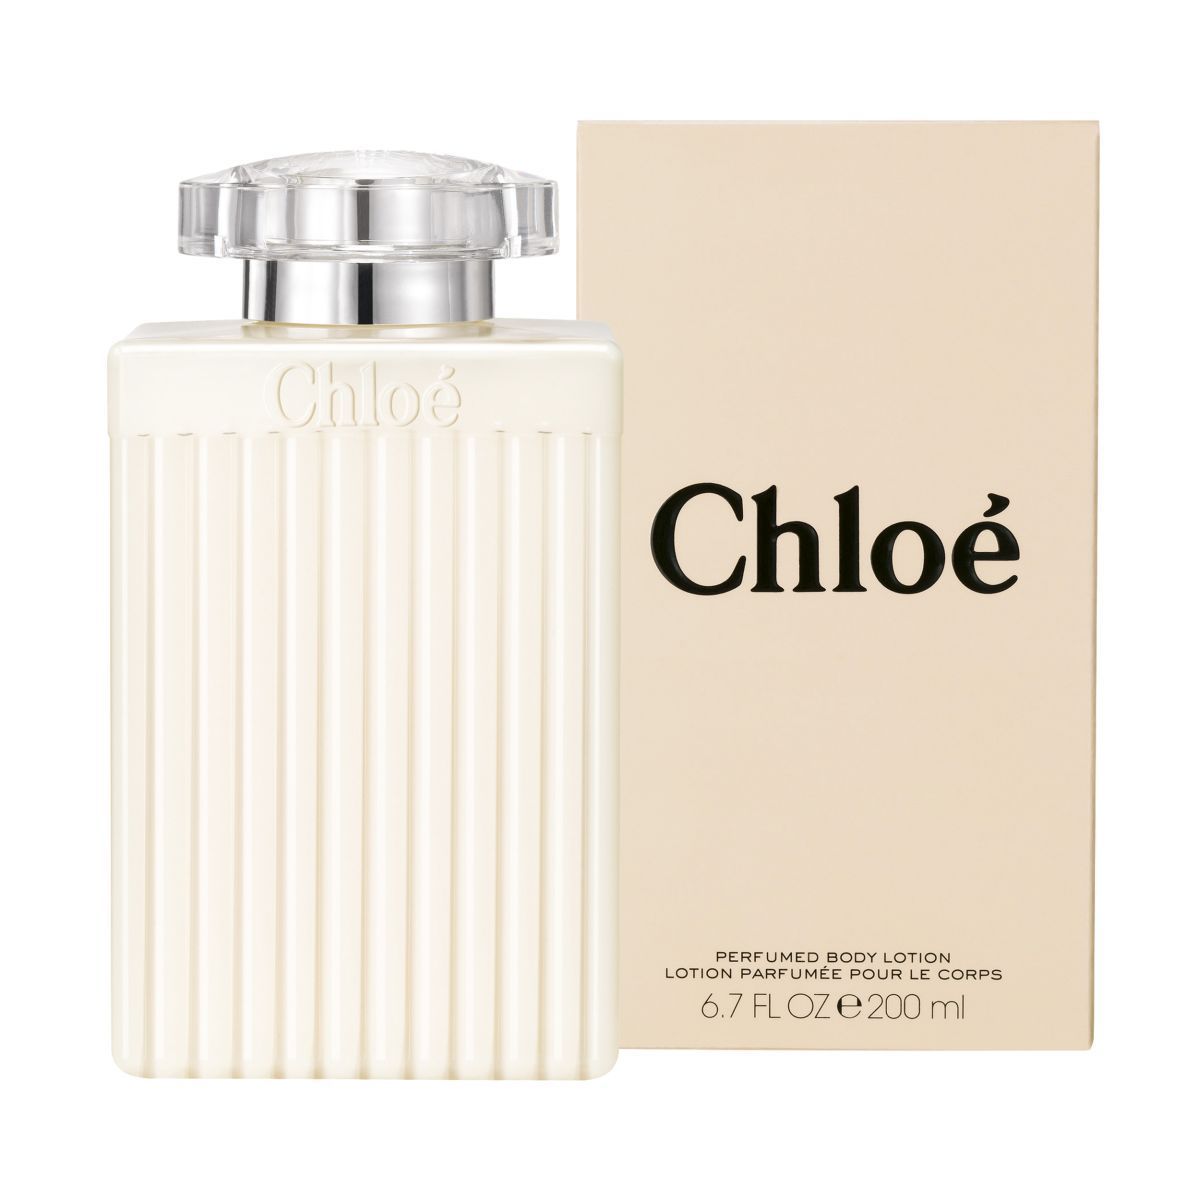 Image of Chloè Perfumed Body Lotion Pour Le Corps - 200 ml